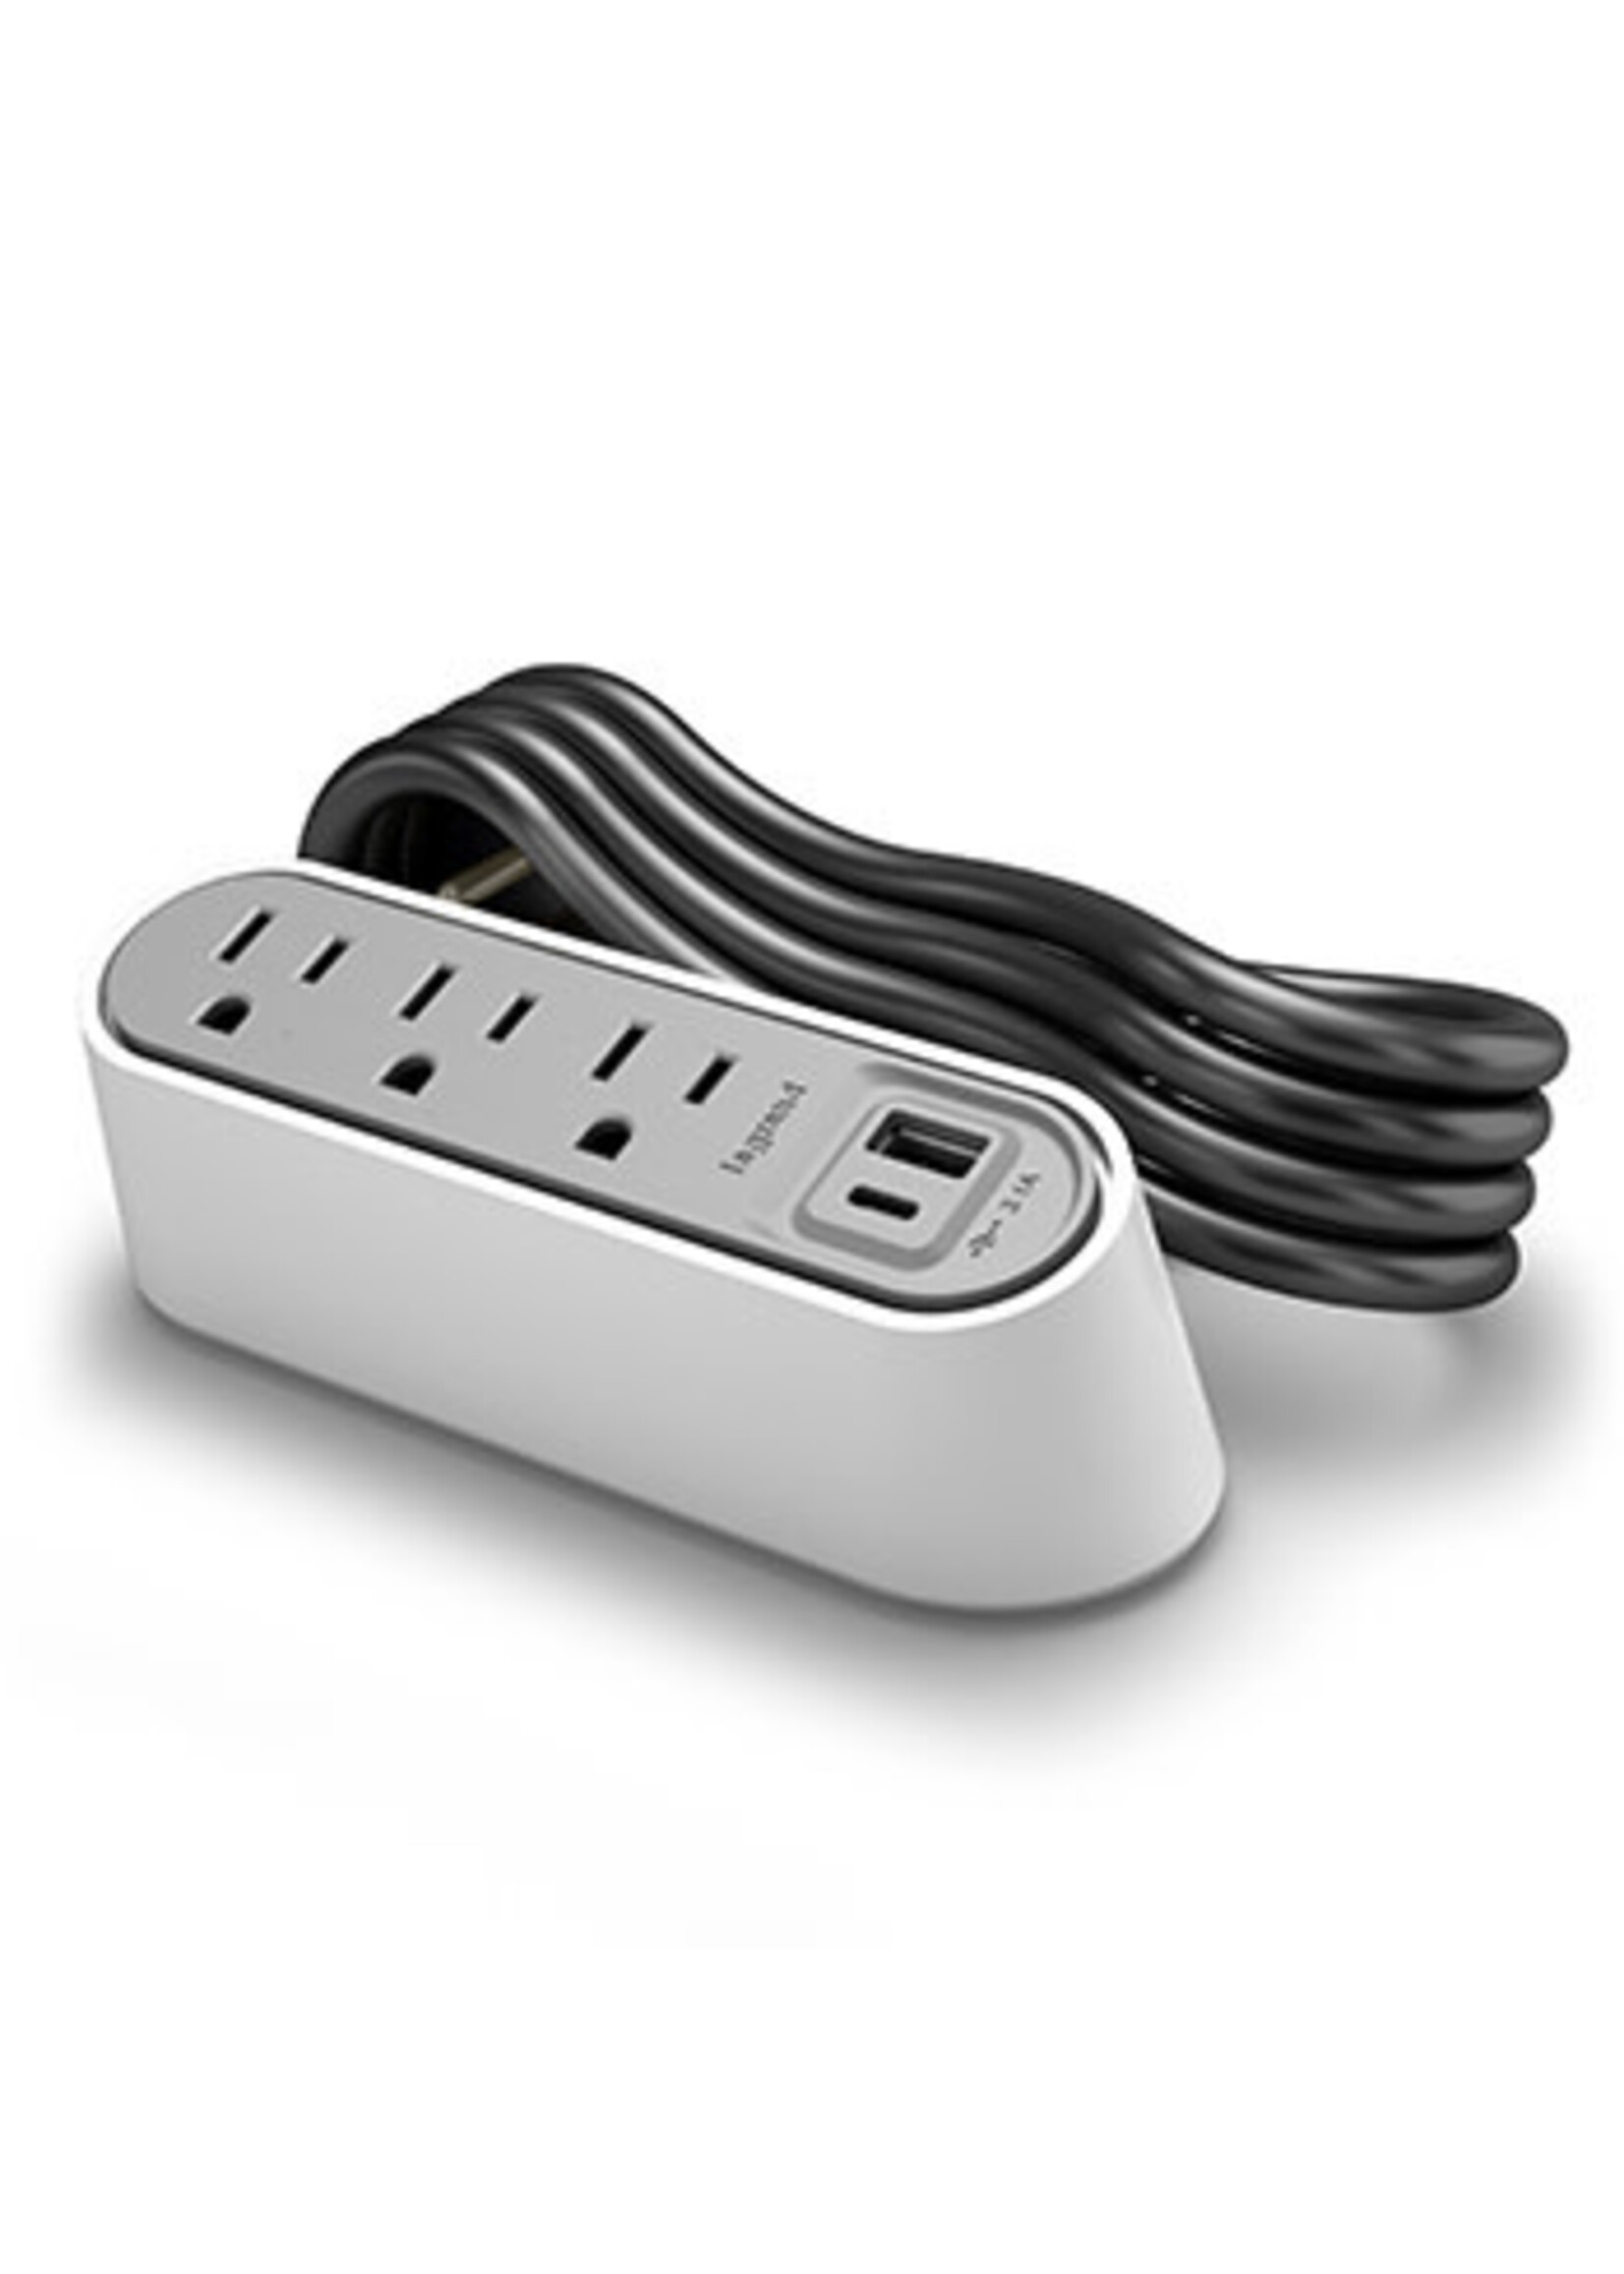 LEGRAND / WIREMOLD WSPC320CWH (White) Three Outlet, 1 USB-A, 1 USB-C Unit w/Mounting Kit 6' CABLE